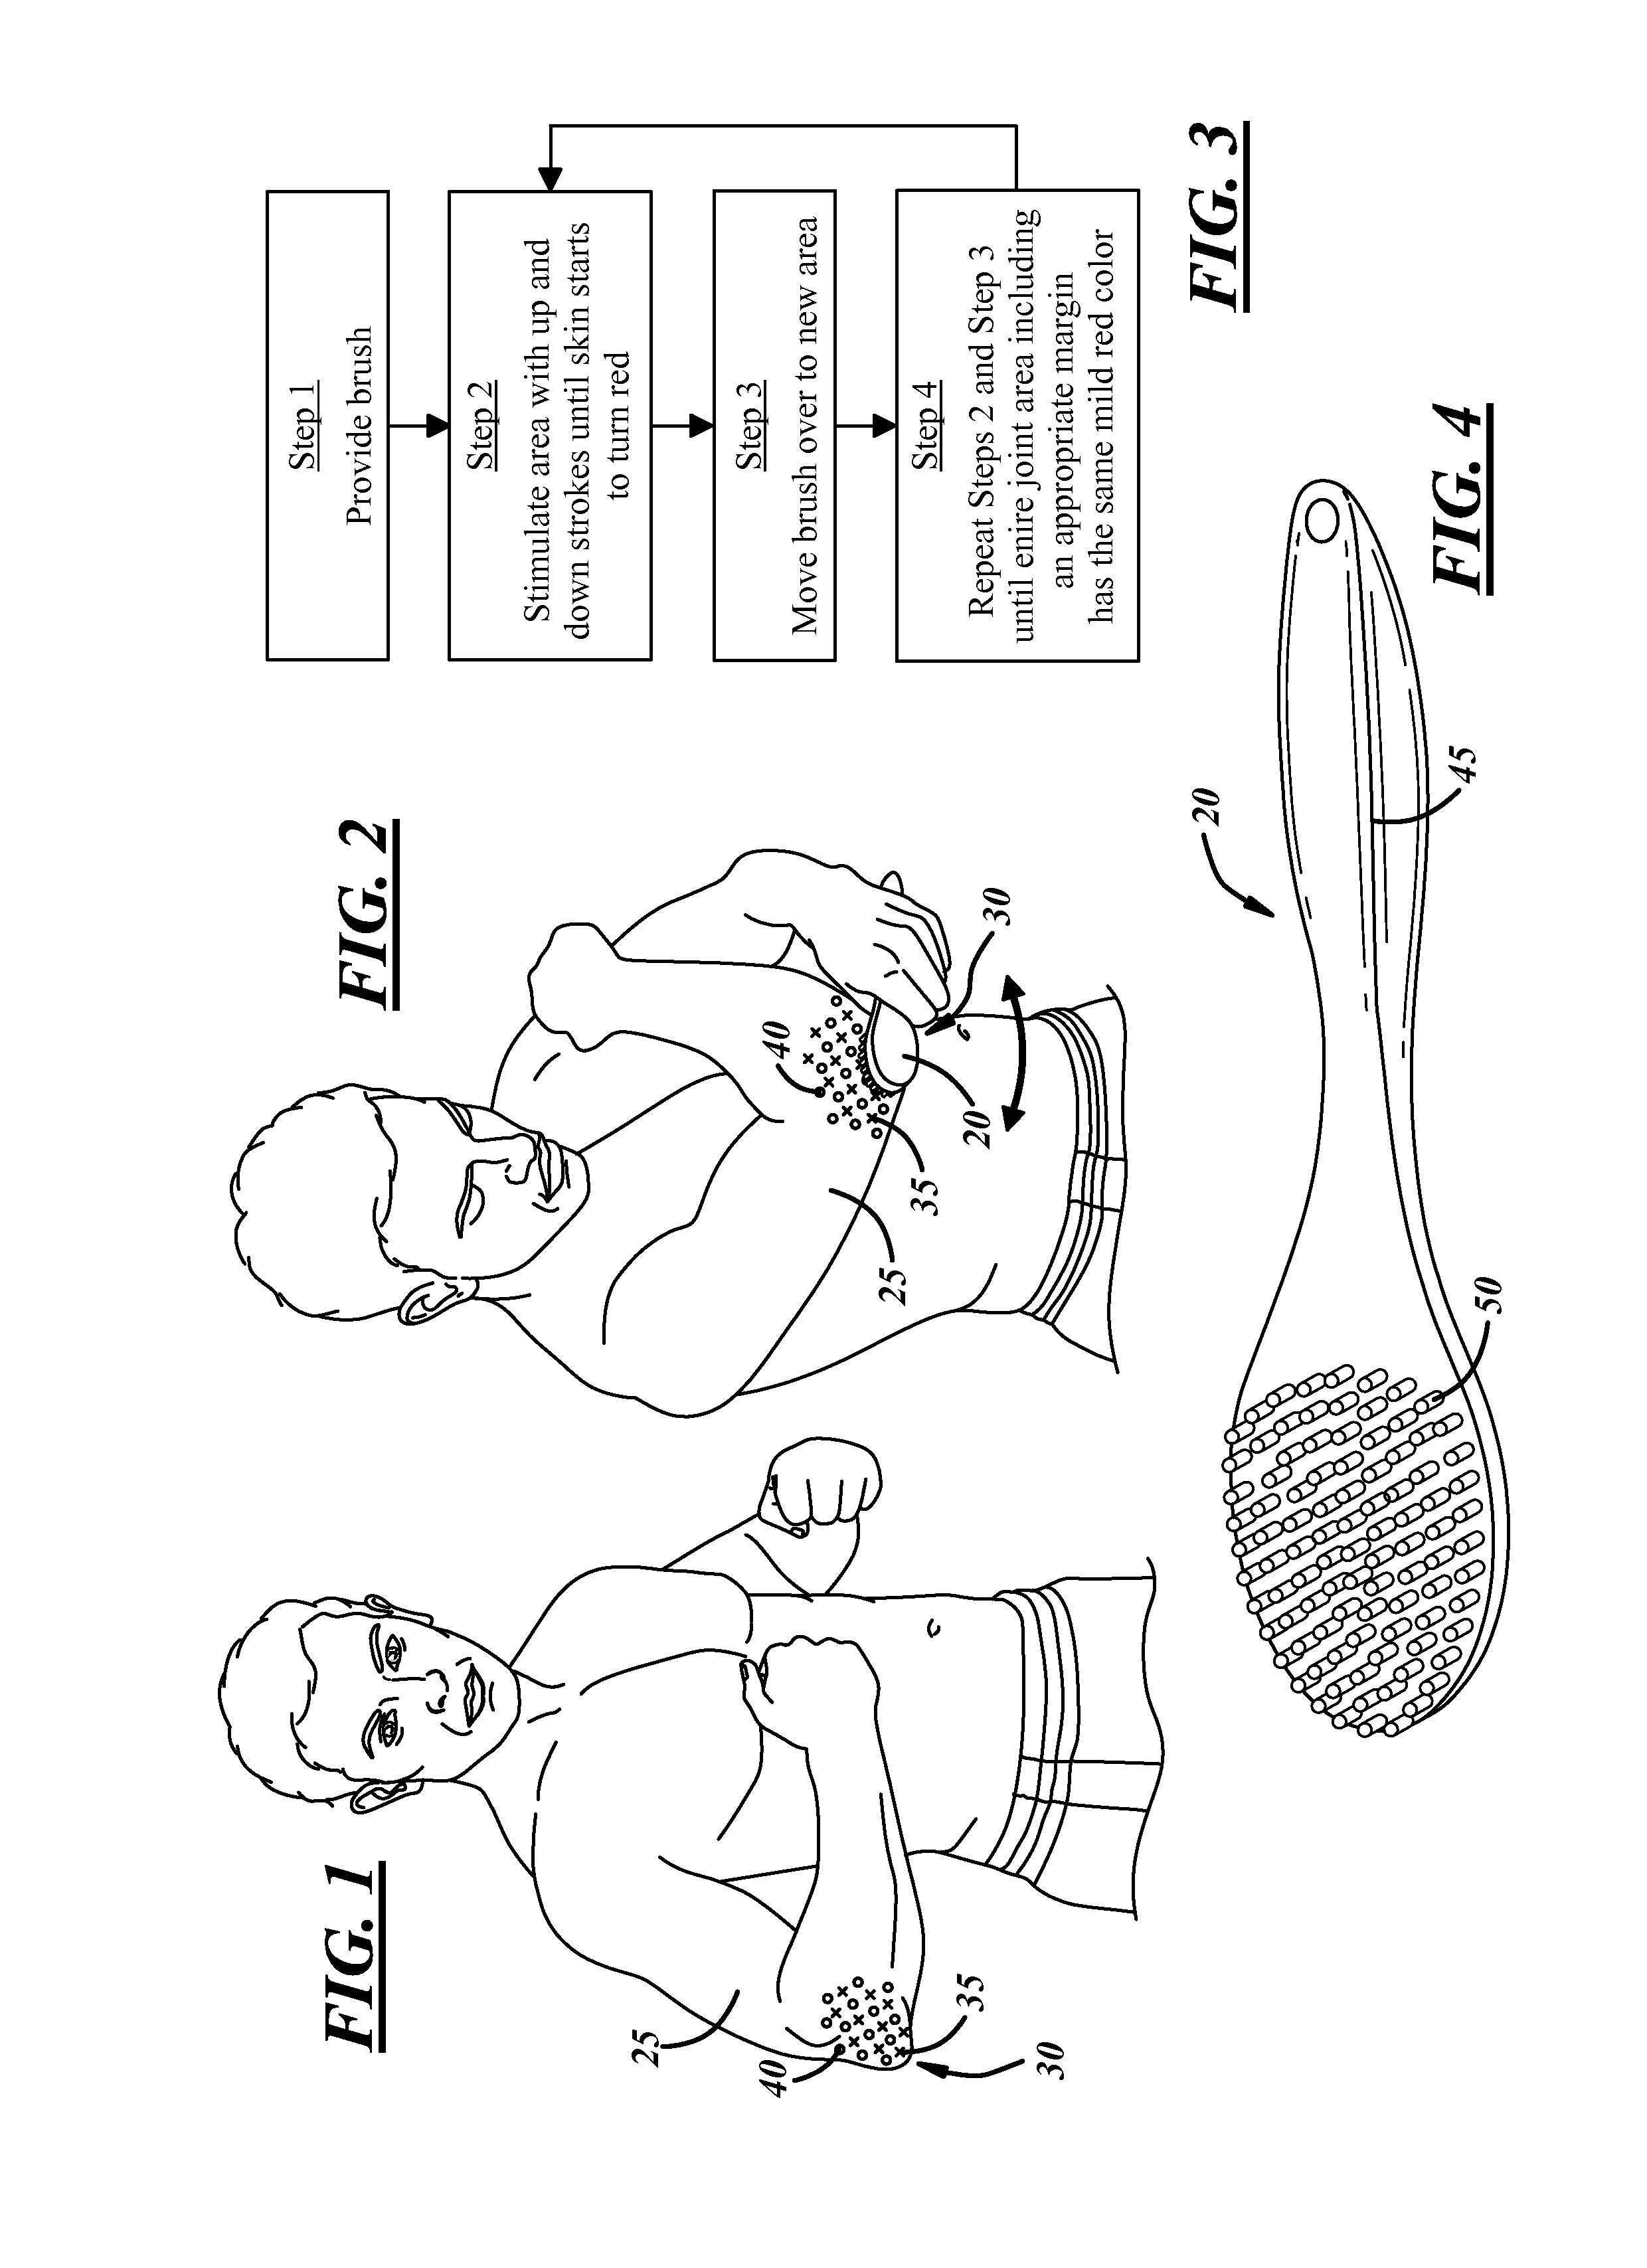 Method and device for treatment of joint pain